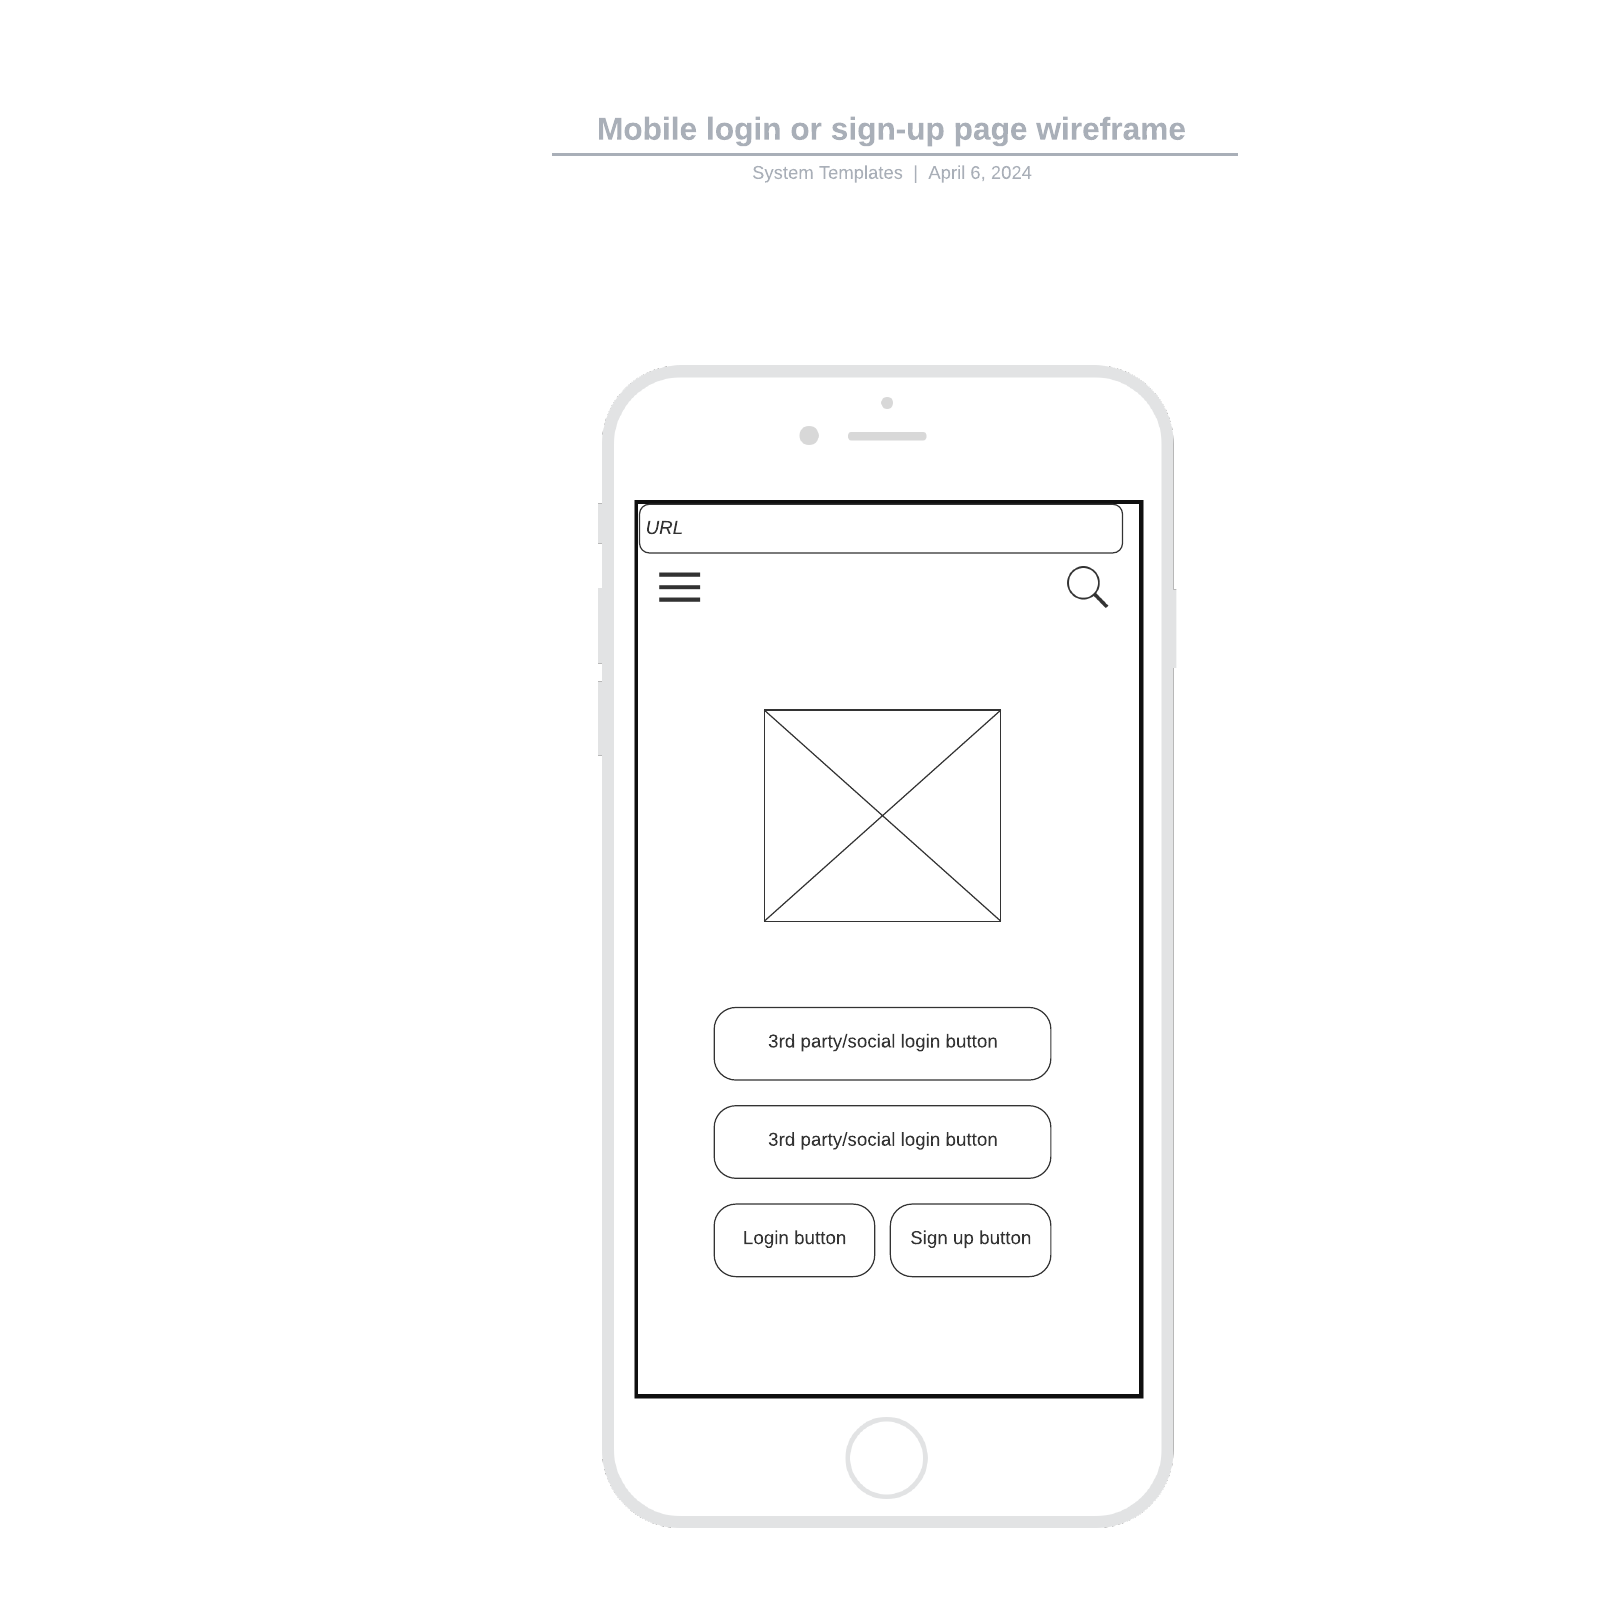 Mobile login or sign-up page wireframe example